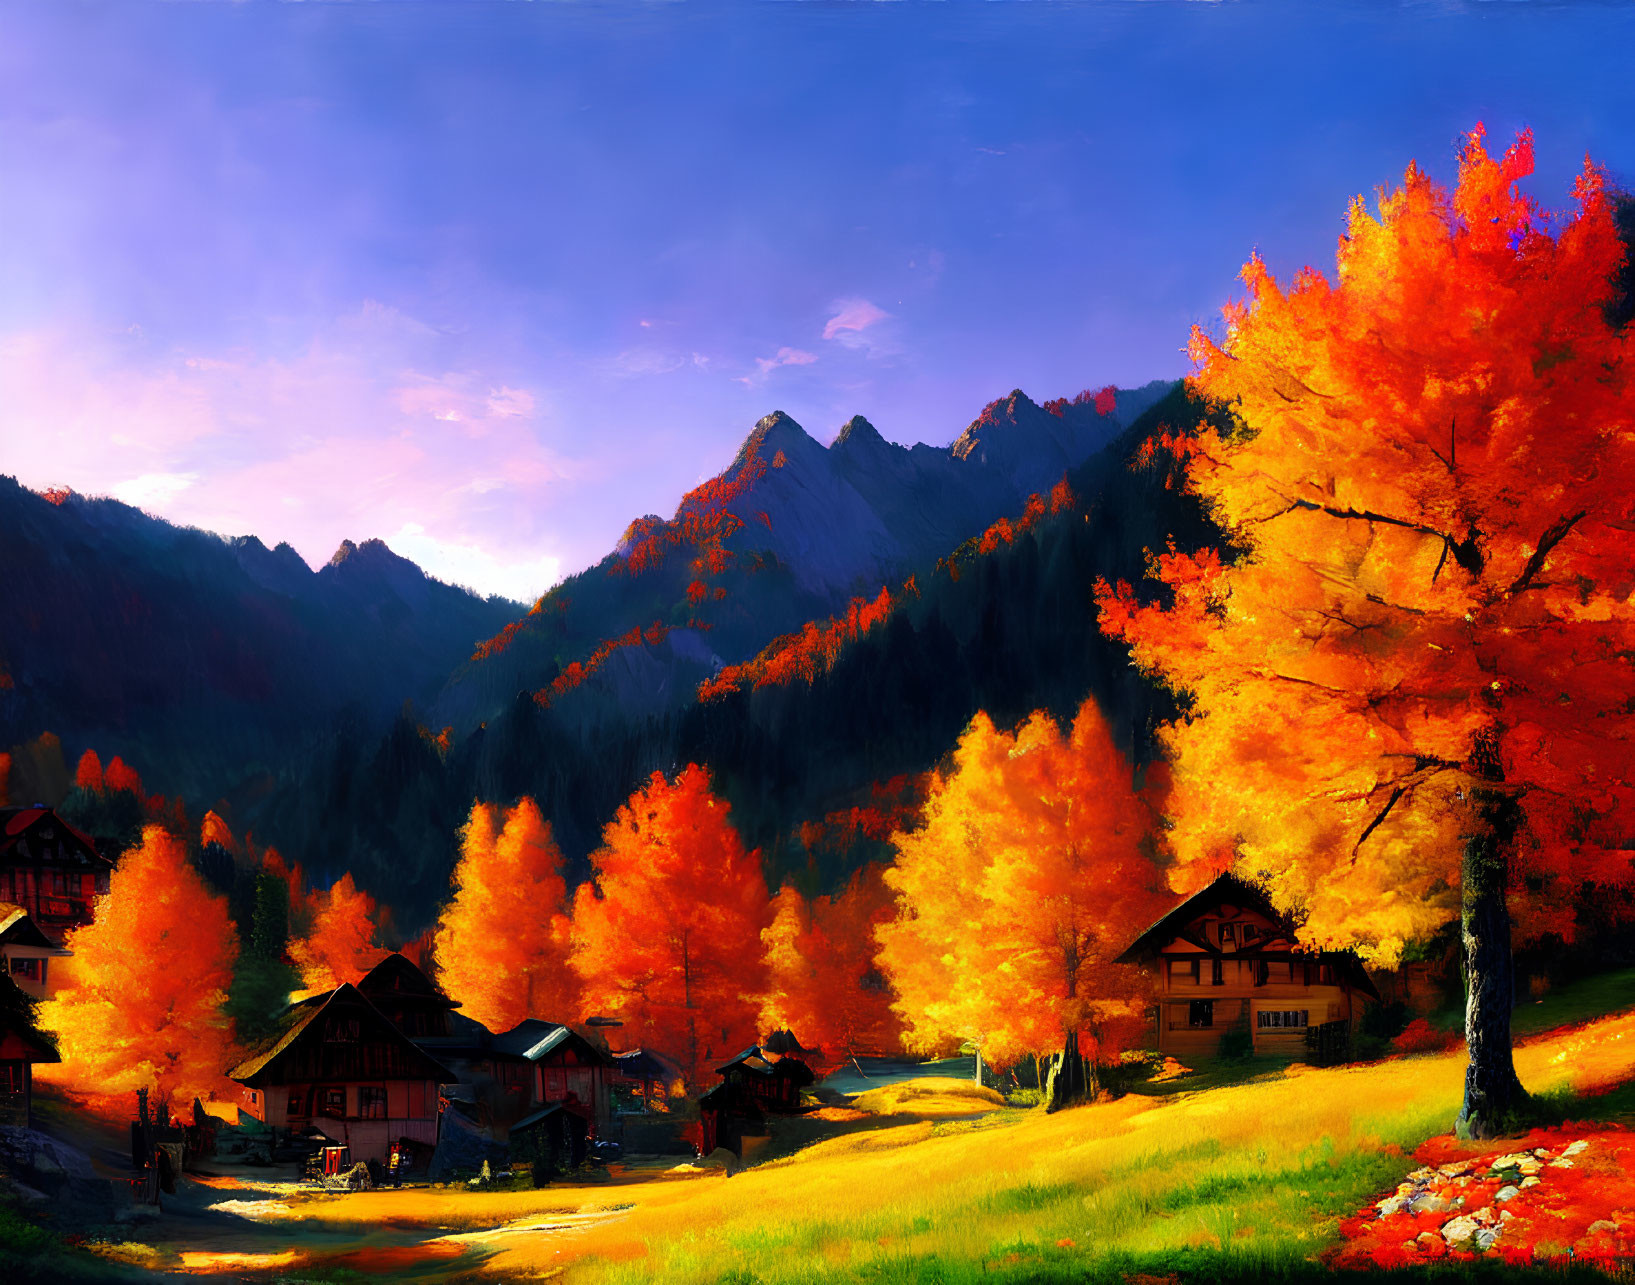 Fiery red and orange autumn foliage with mountain backdrop